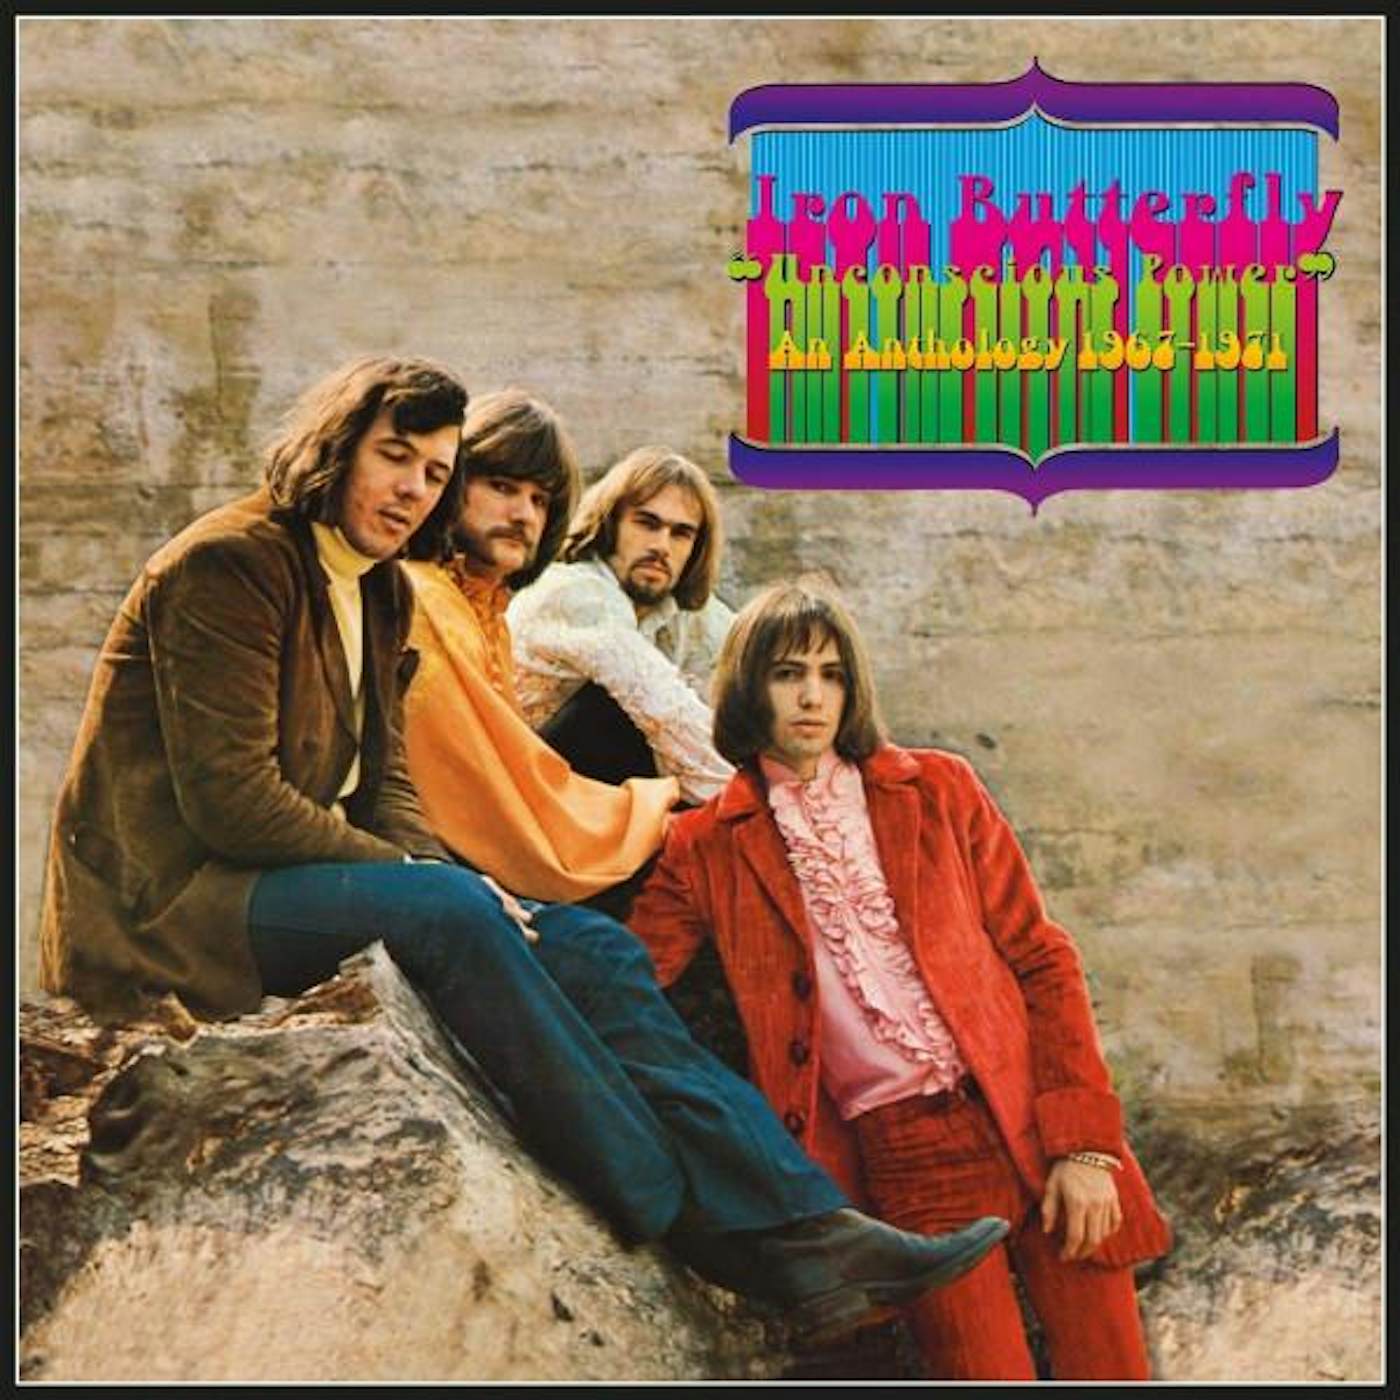 Iron Butterfly UNCONSCIOUS POWER: AN ANTHOLOGY 1967-1971 (7CD REMASTERED BOXSET) CD